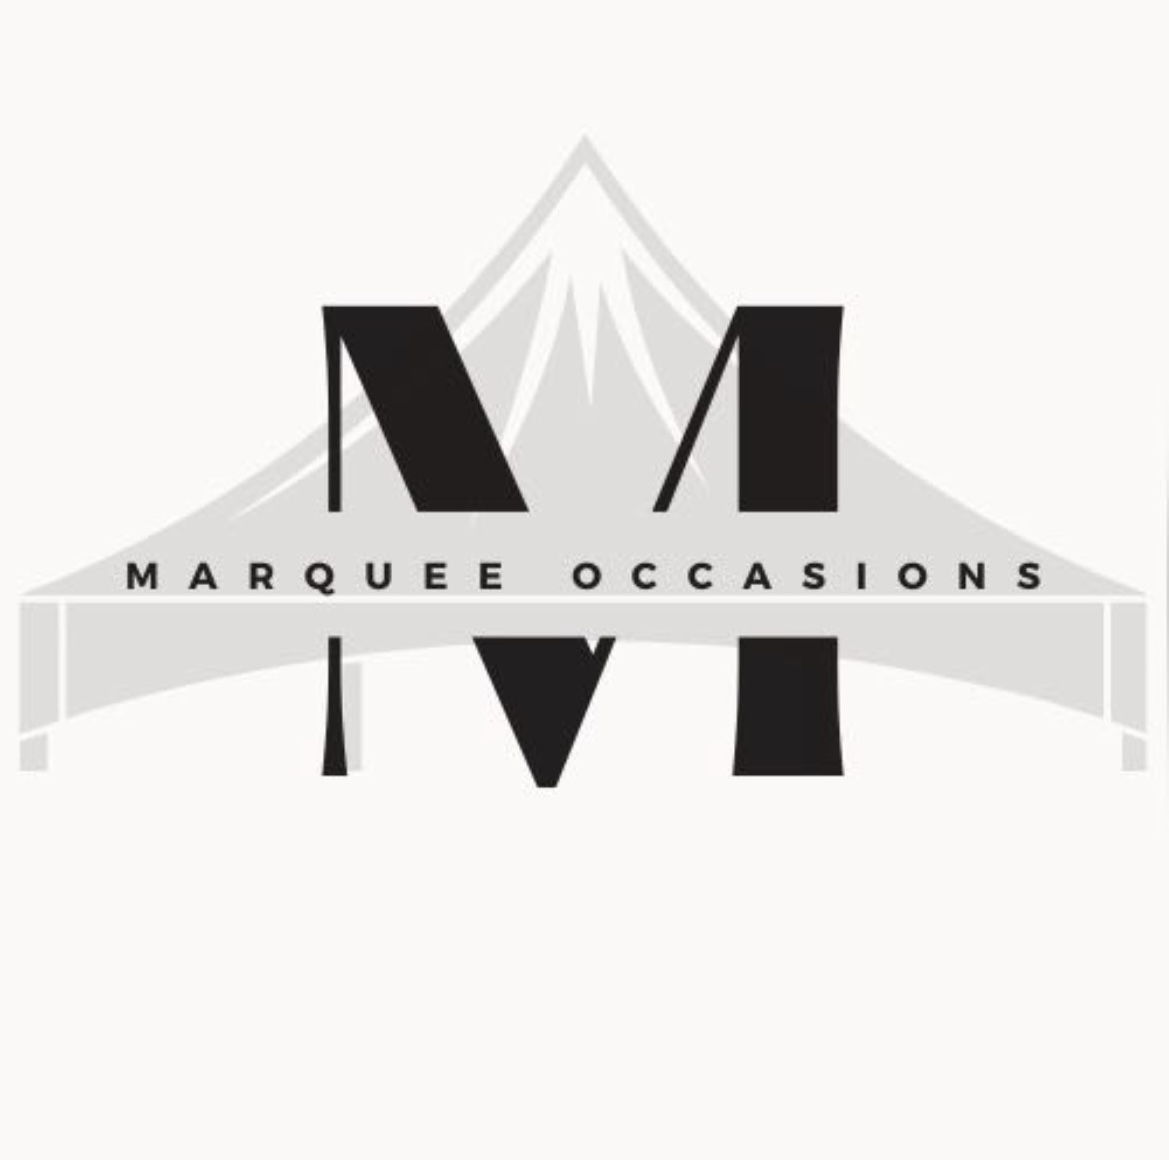 Marquee Occasions